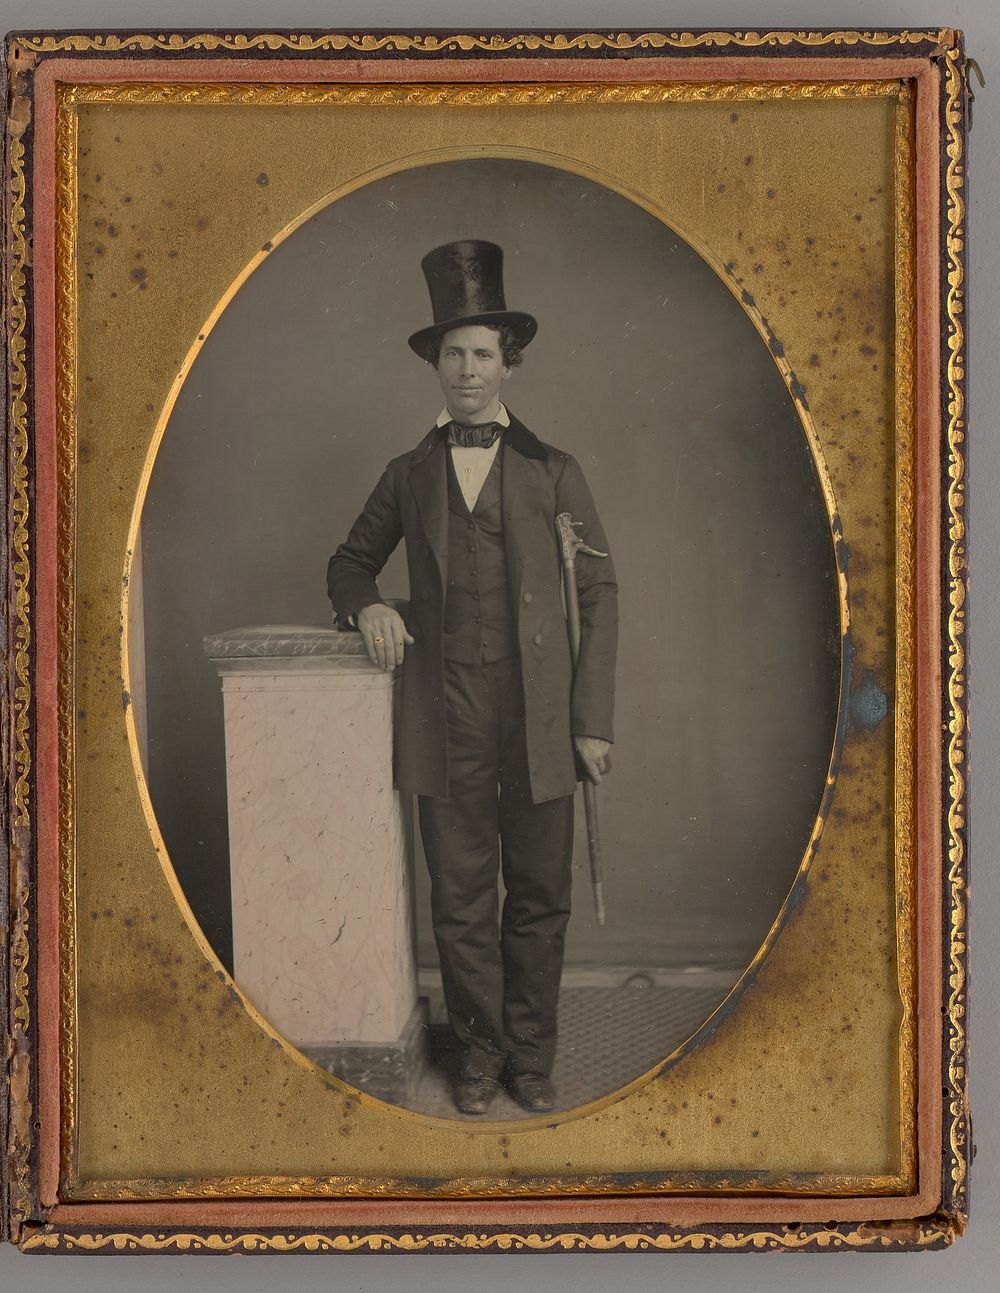 Untitled (Portrait of a Standing Man with a Top Hat) by Unknown Maker